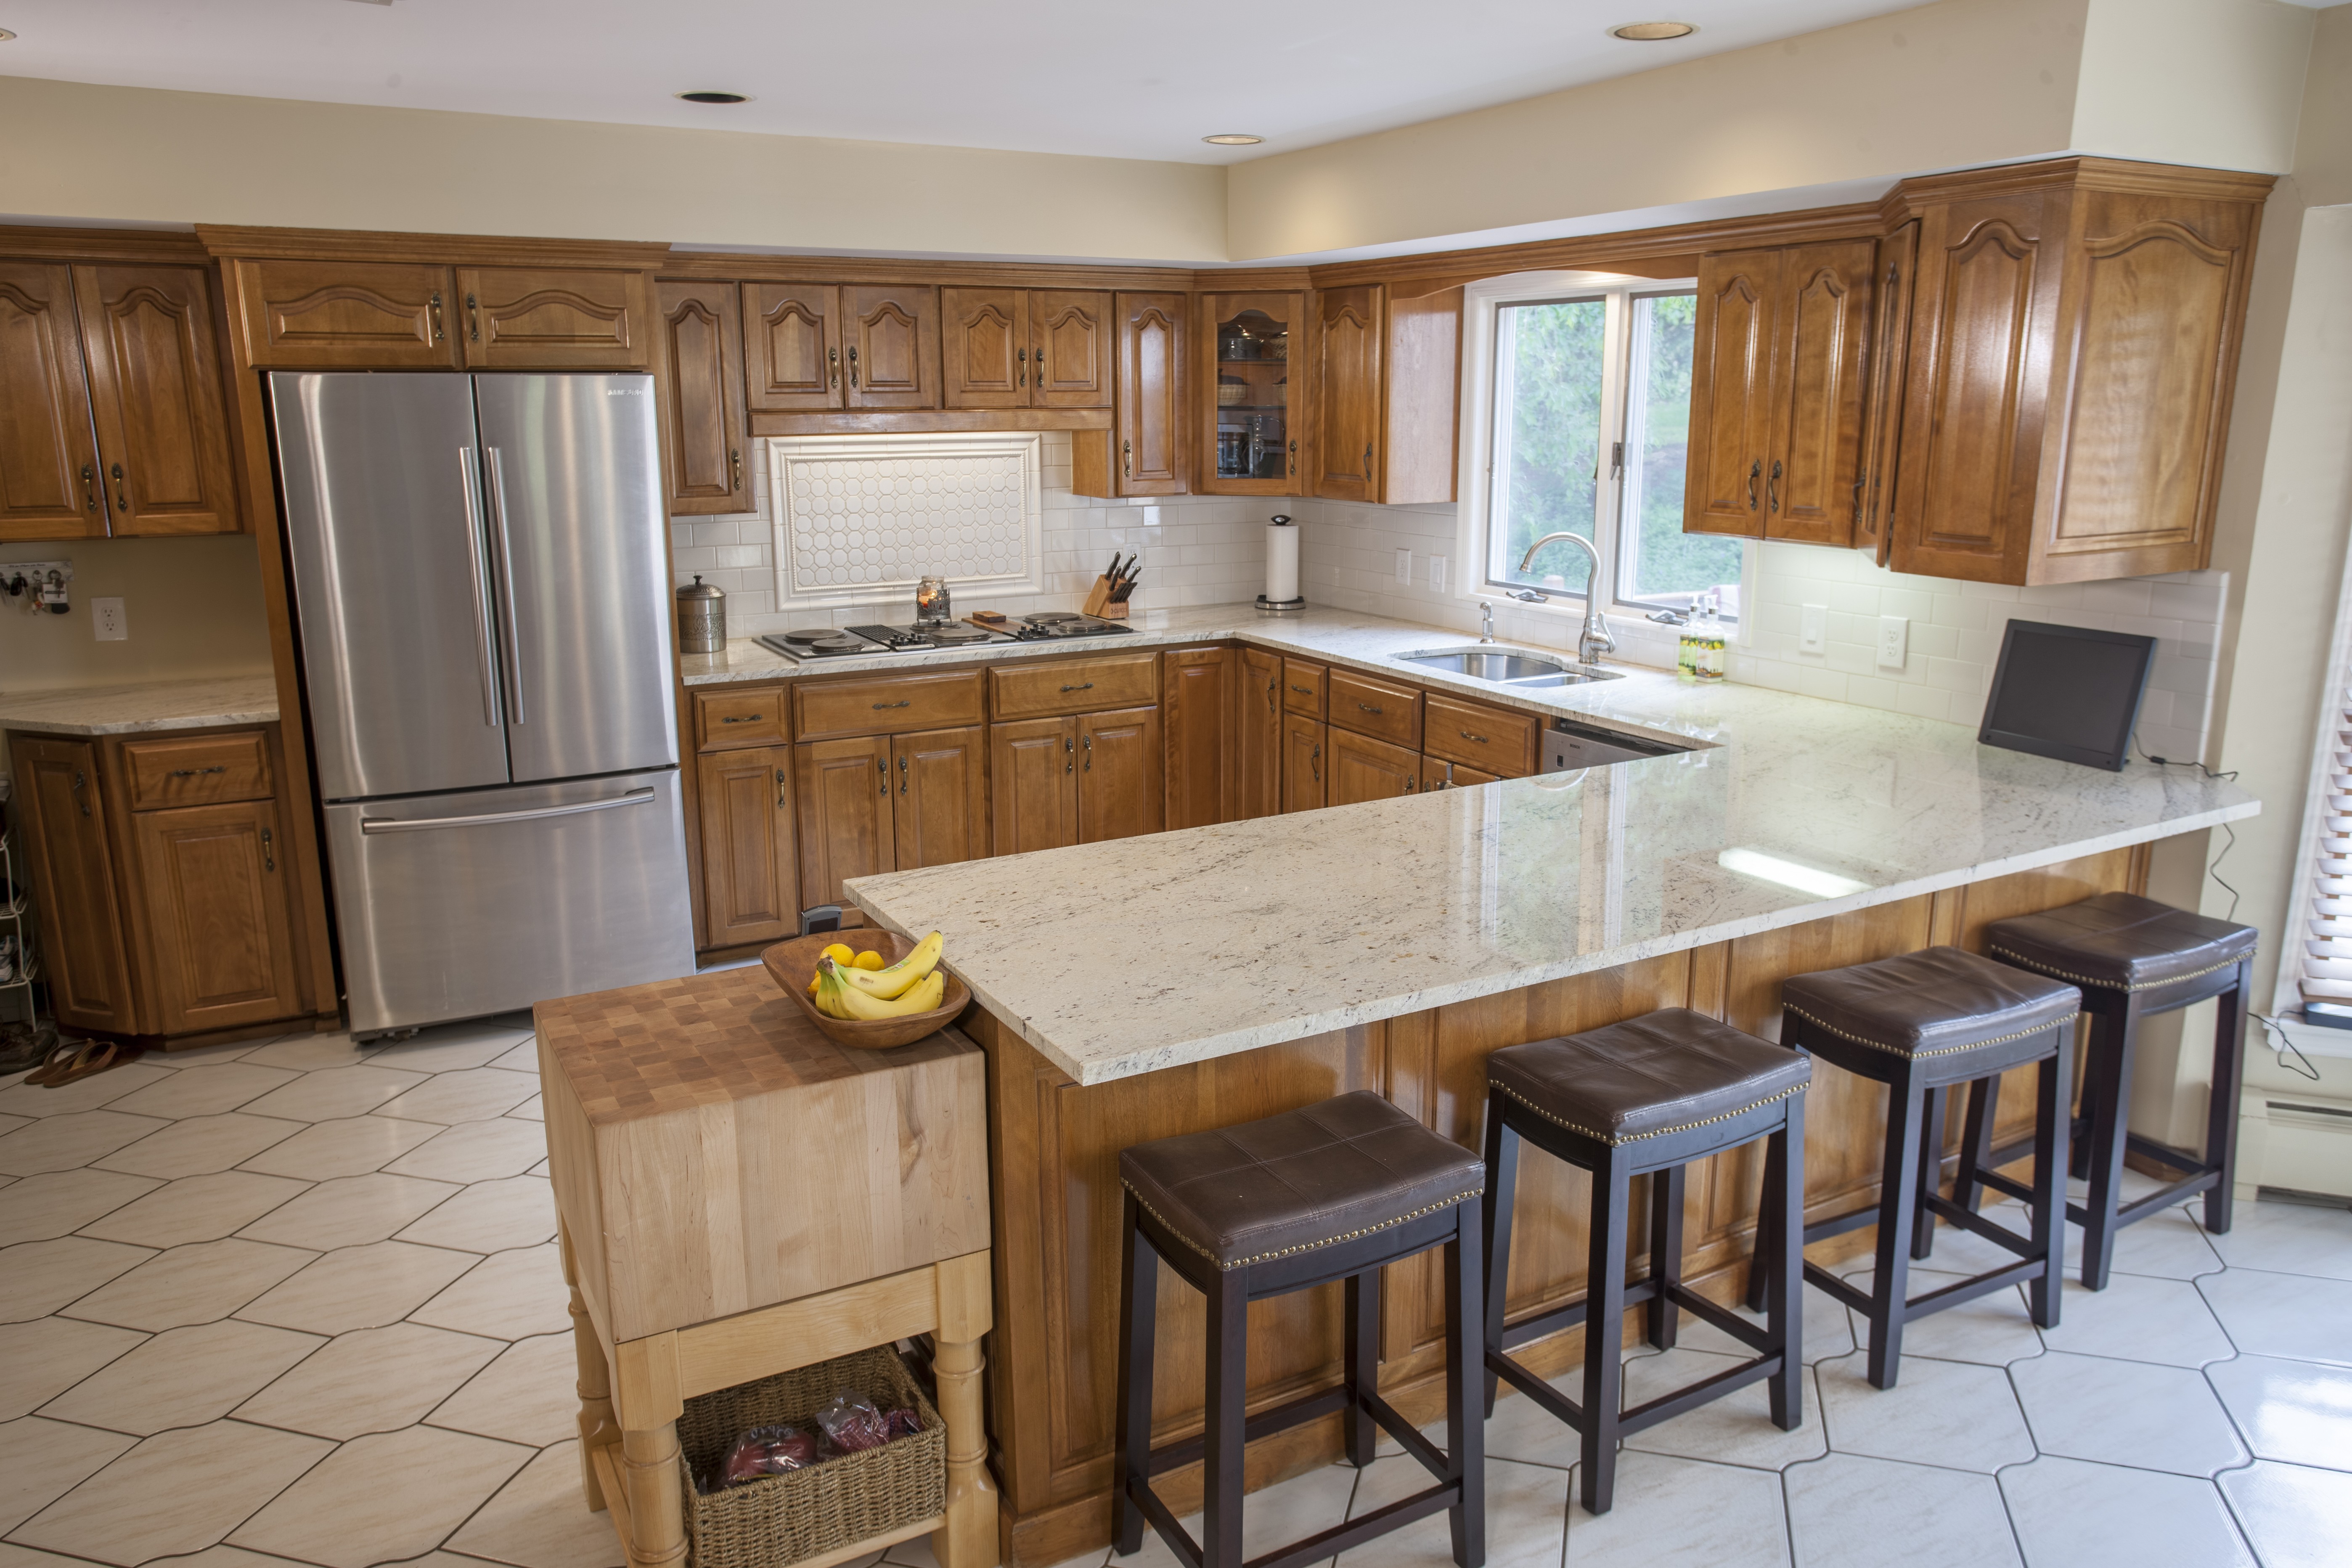 kitchen with light colored granite